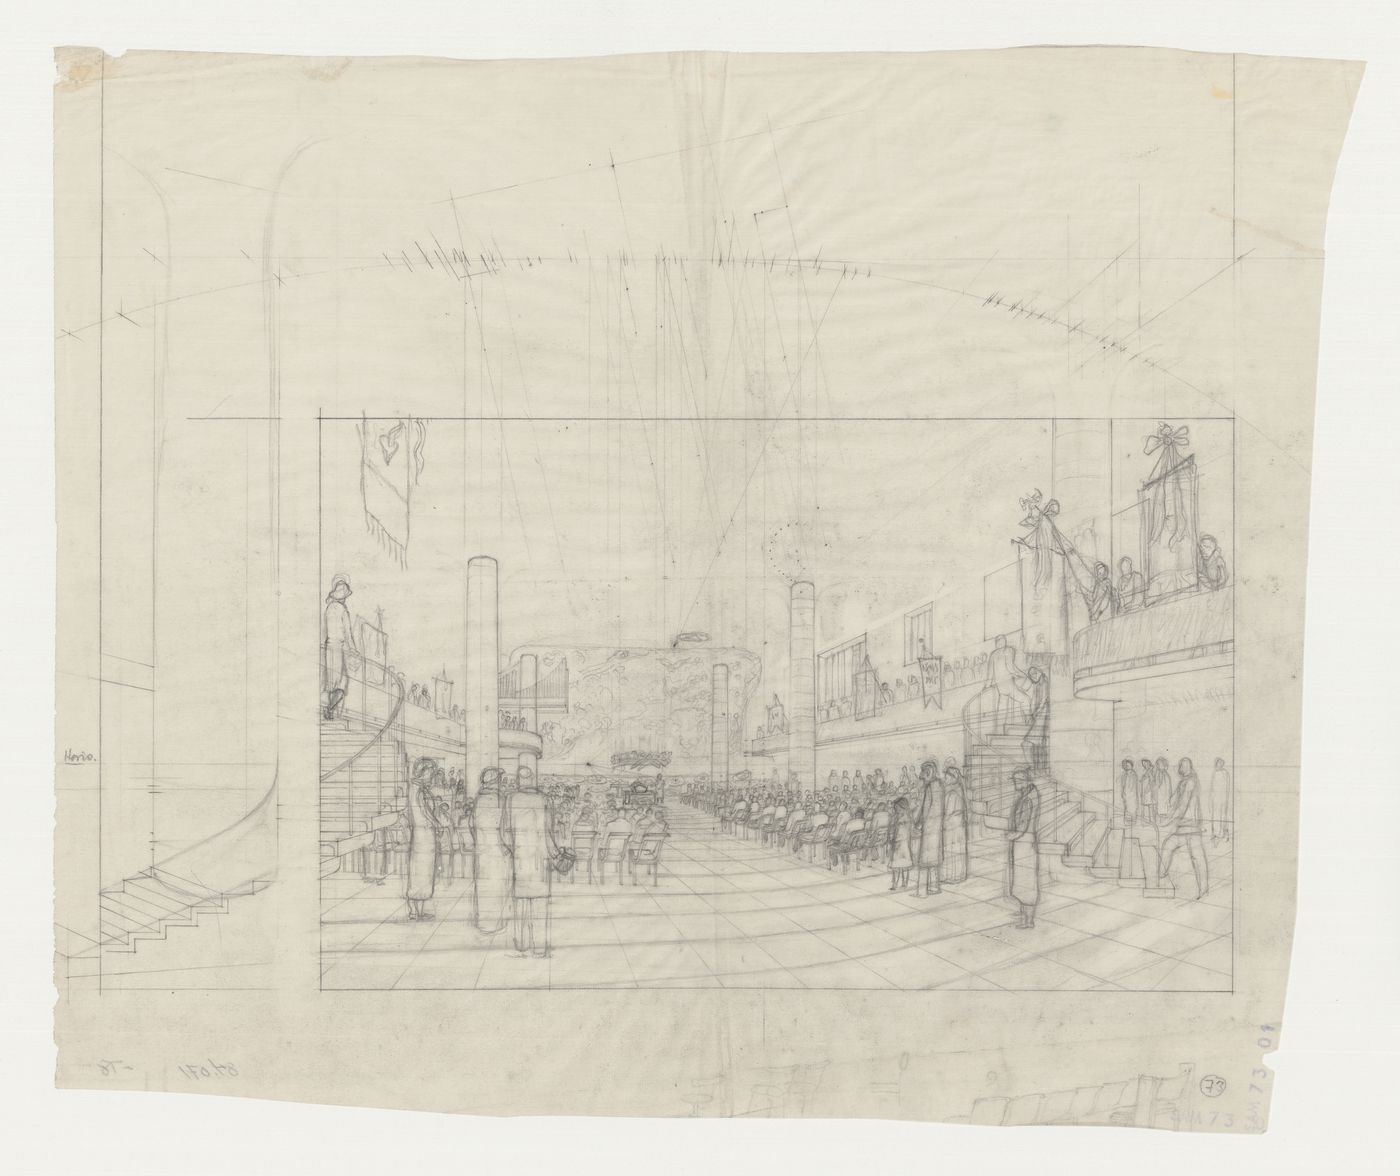 Interior sketch perspective for the Chapel of the Holy Cross showing a mural and a service underway, Woodland Crematorium, Woodland Cemetery, Stockholm, Sweden